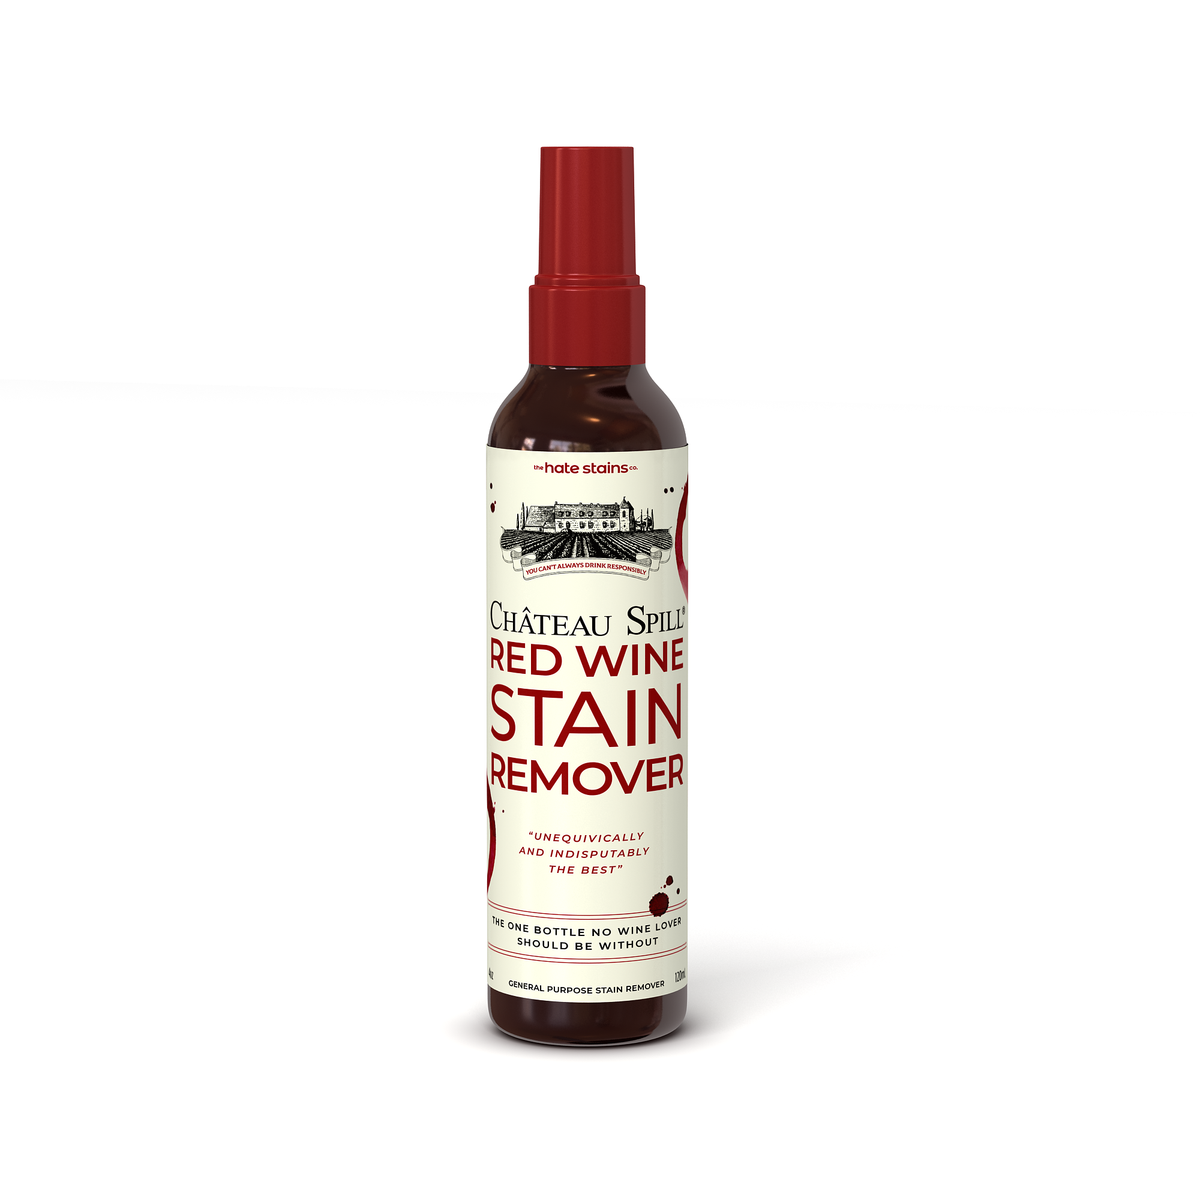 Chateau Spill Red Wine Stain Remover 120ml Bottle